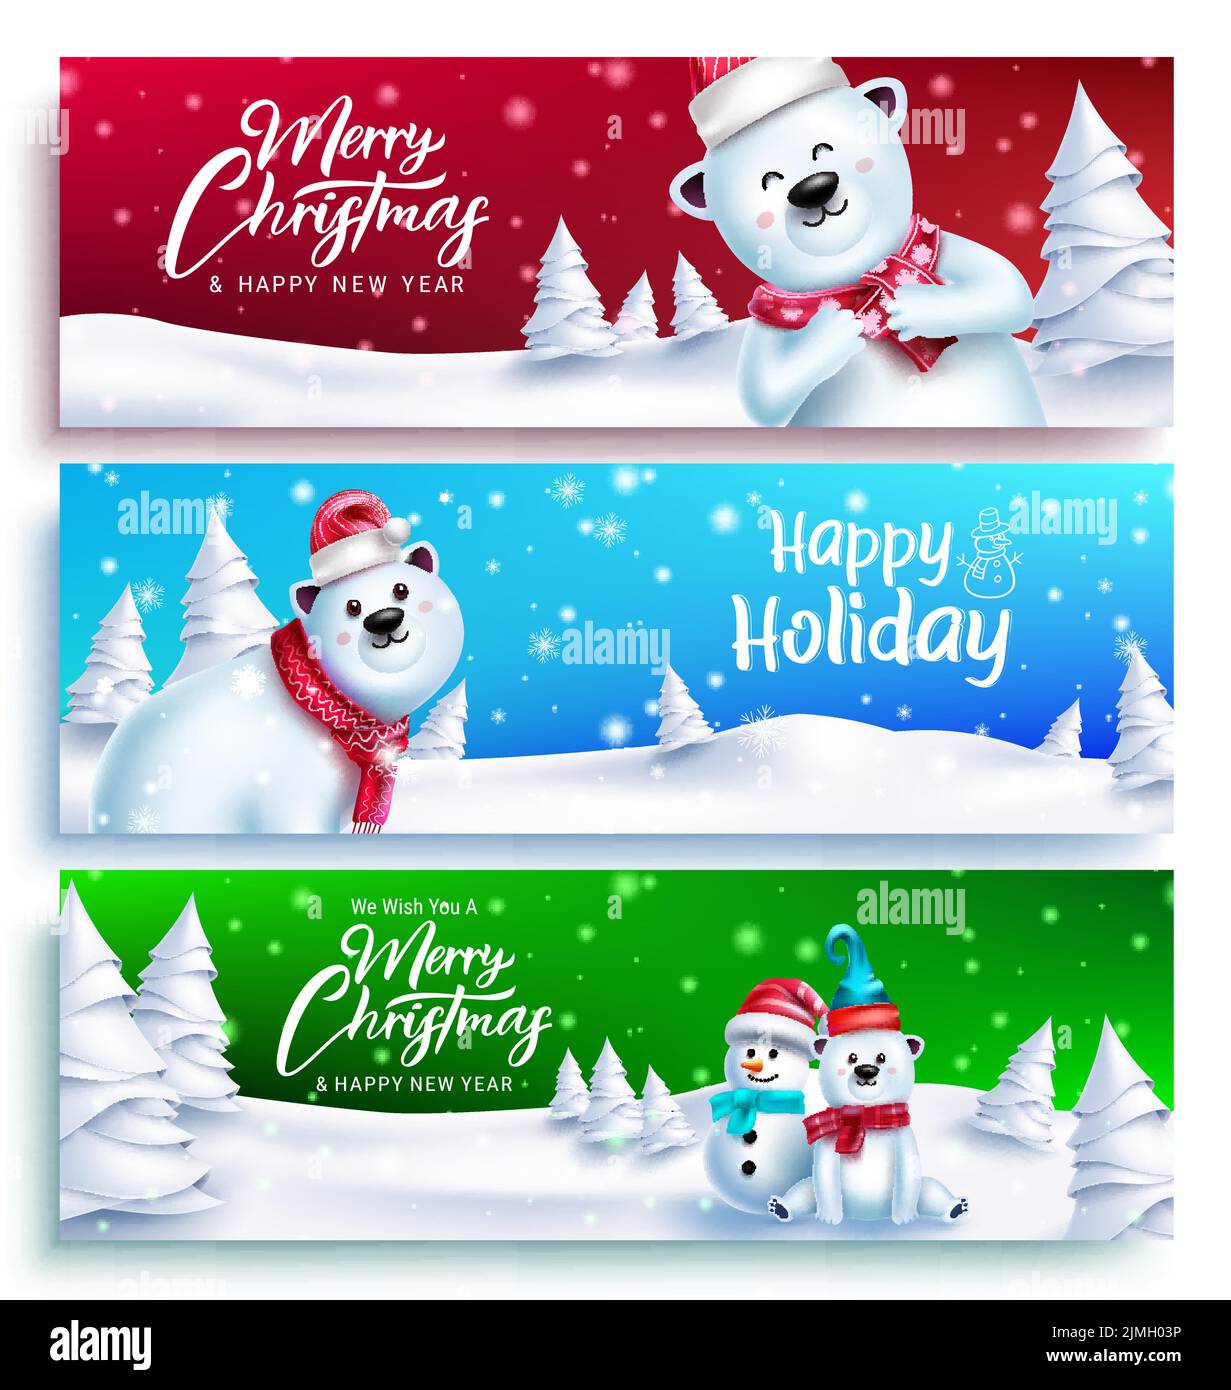 Christmas greeting character vector set. Merry christmas text with polar bear 3d characters in outdoor snow background for xmas design collection. Stock Vector